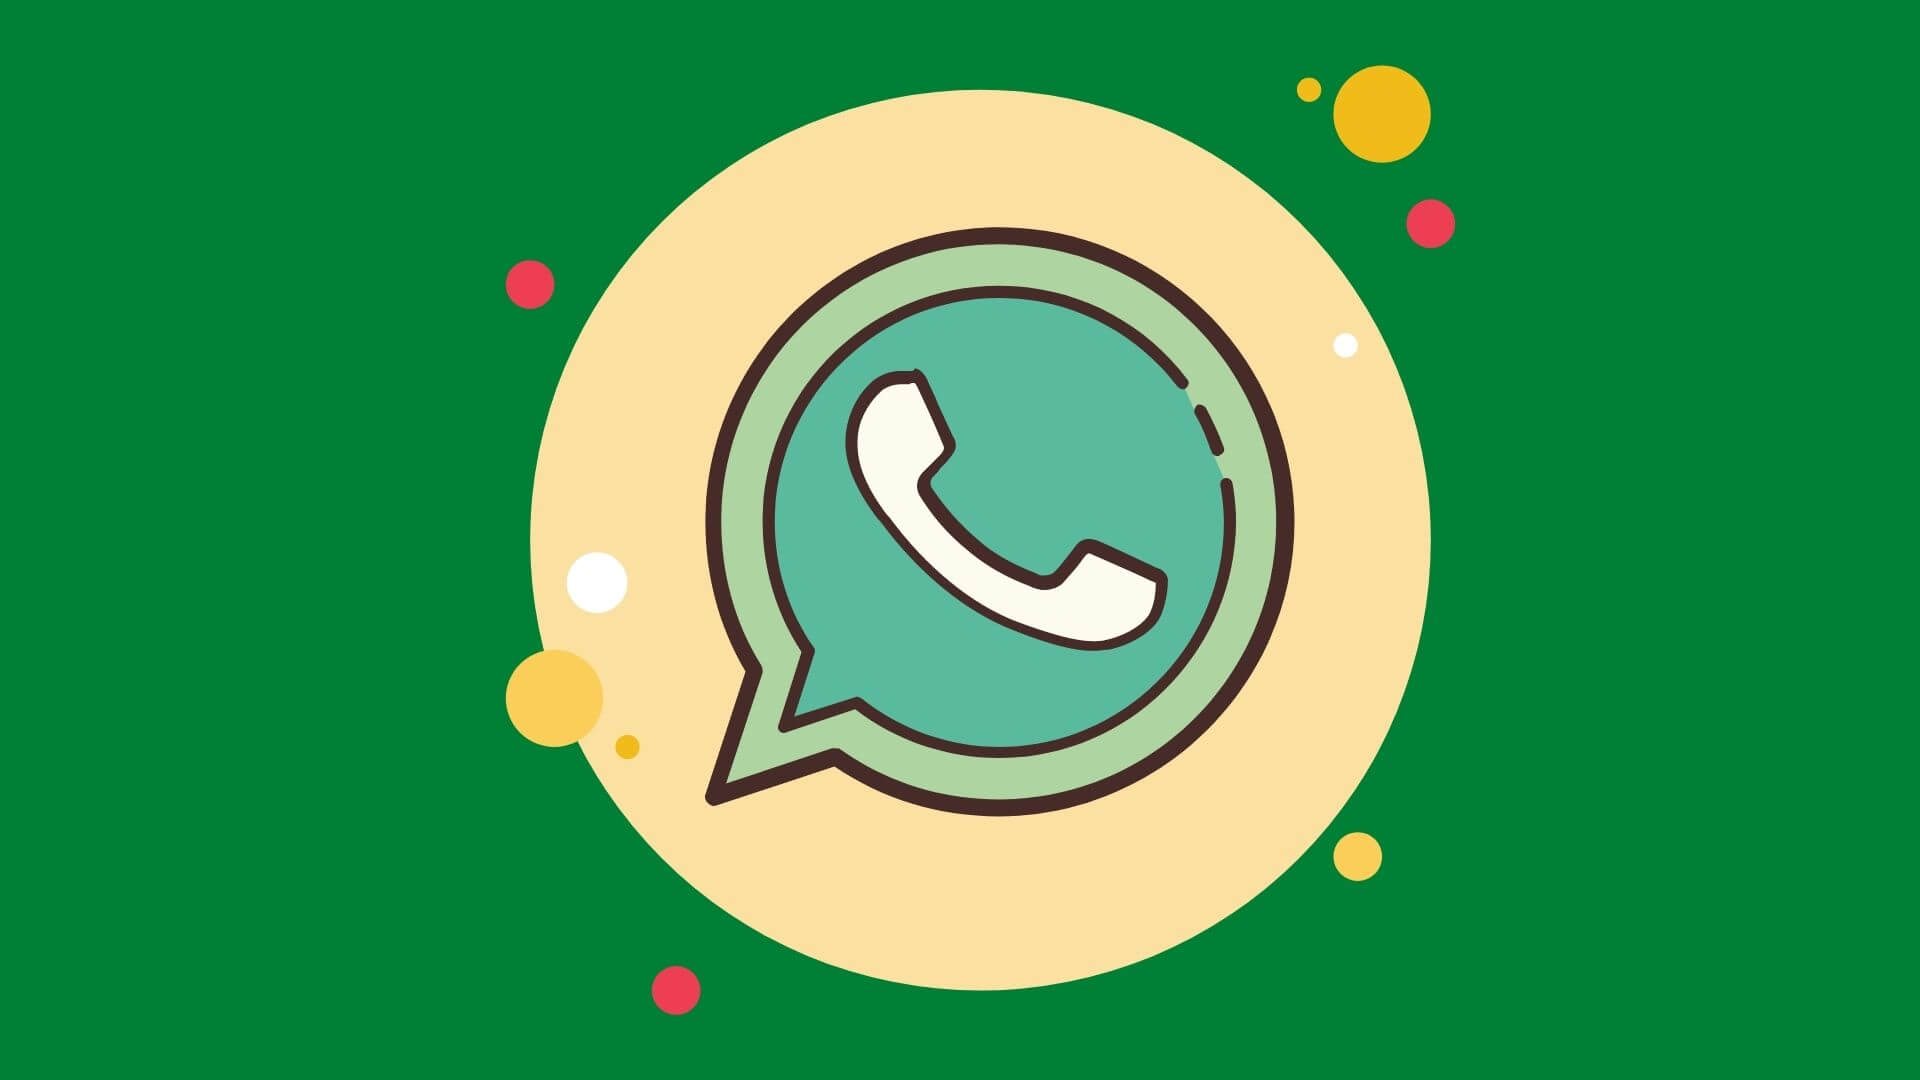 whatsapp introduces a feature that allows you to hide the ip address during audio and video calls